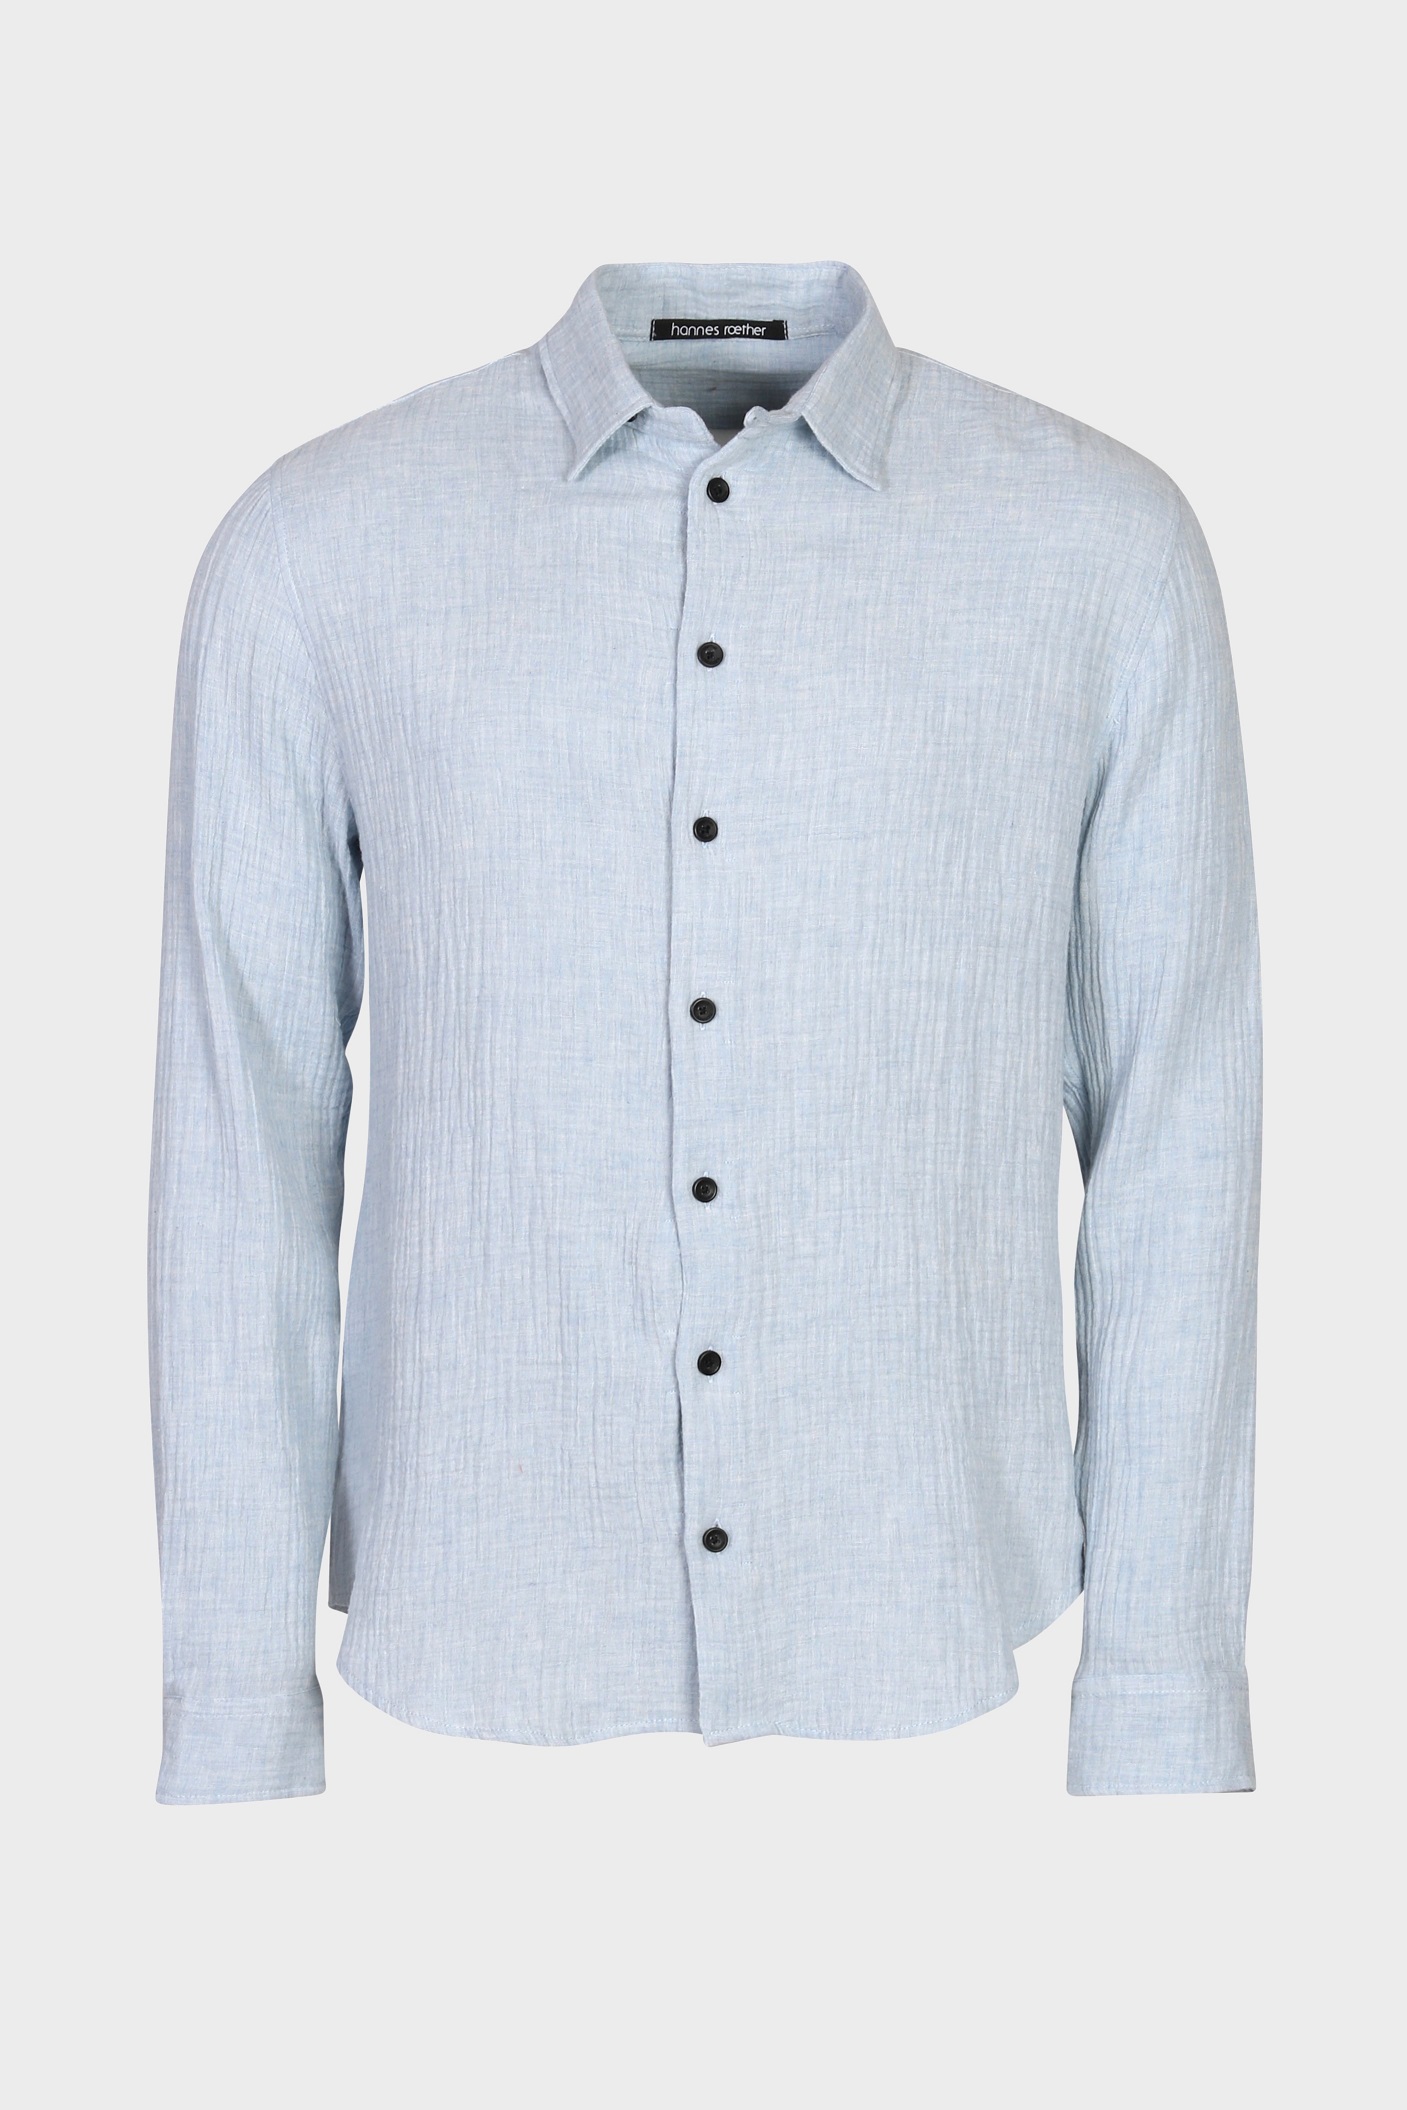 HANNES ROETHER Mousseline Shirt in Light Blue M